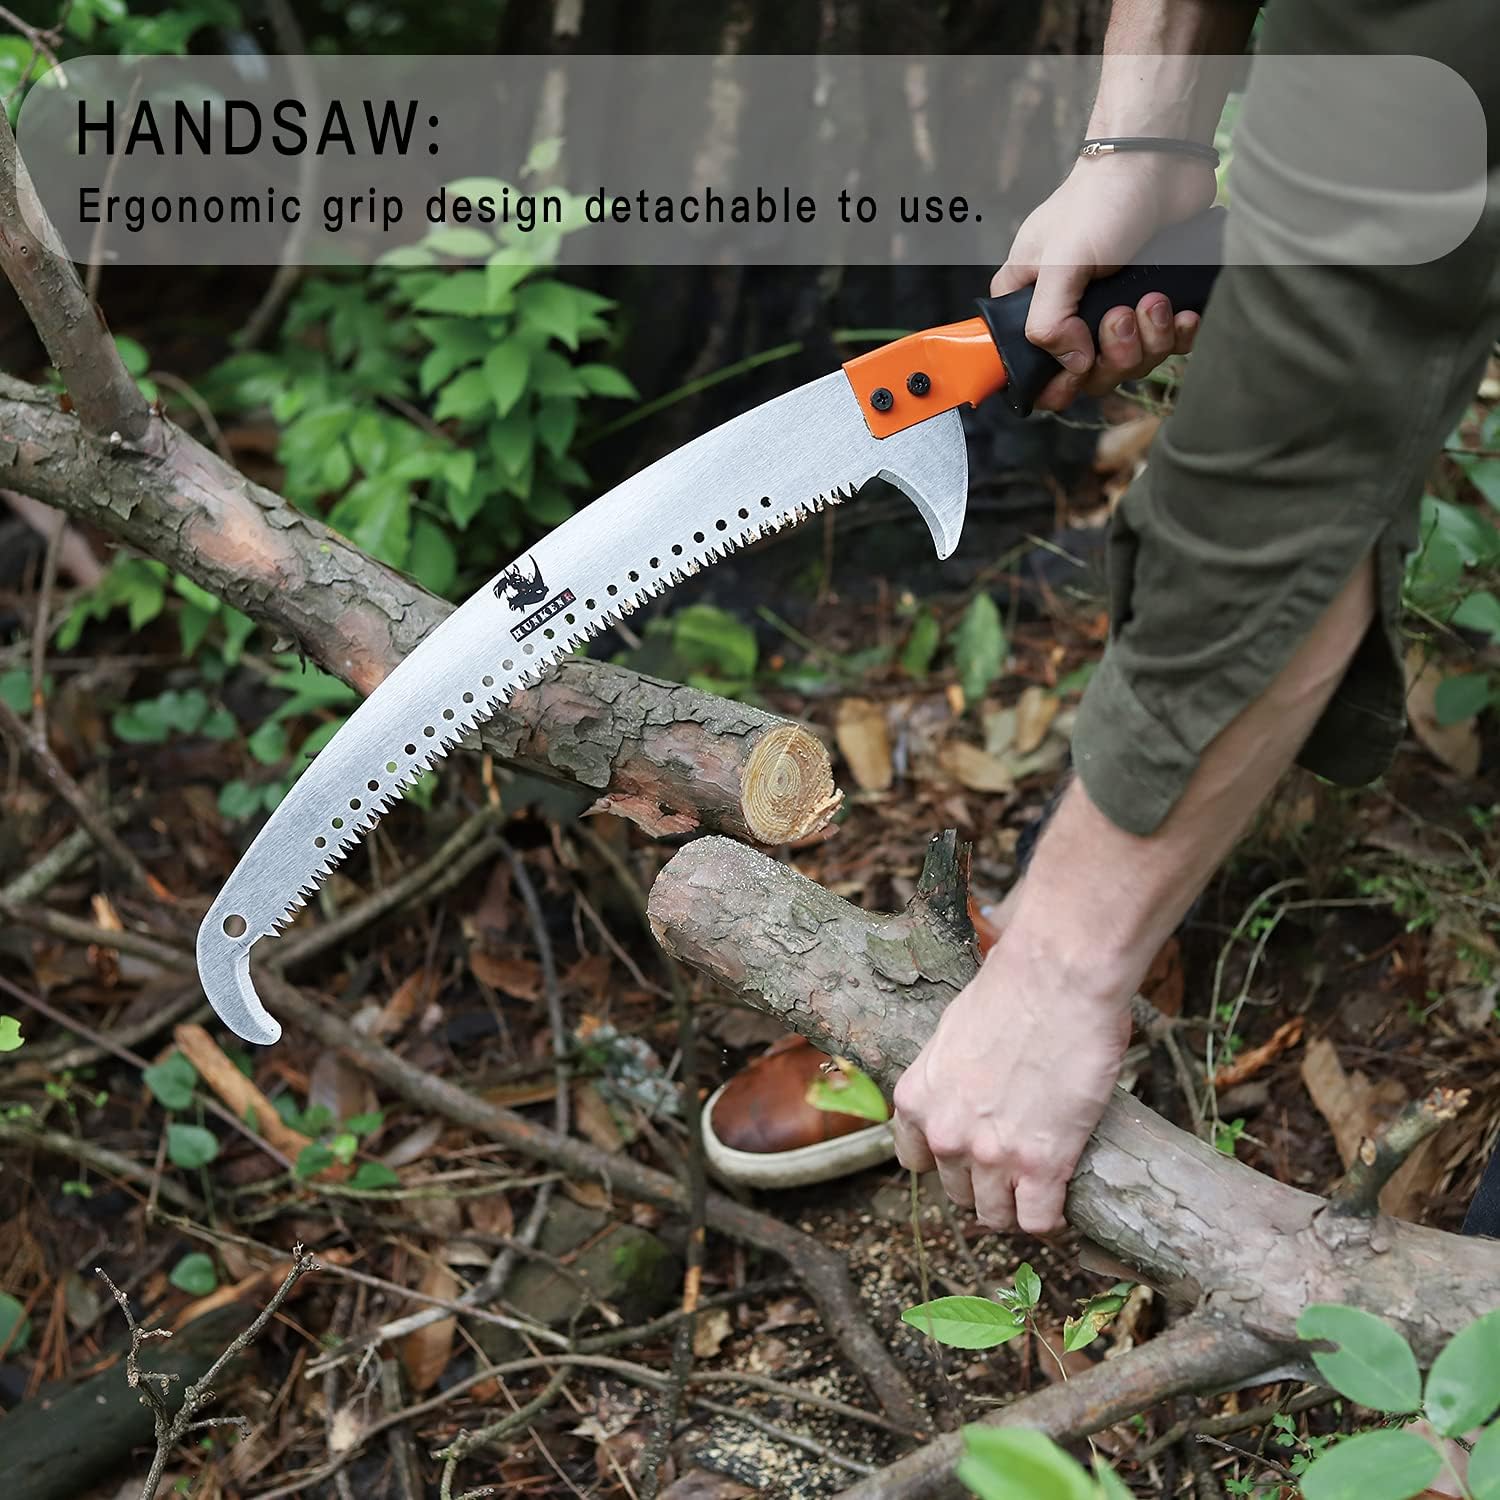 HUNKENR Manual Pole Saw&#239;&#188;&#140;5-16 Ft Extendable Tree Pruner/Pole Saws for Tree Trimming with Detachable Handsaw